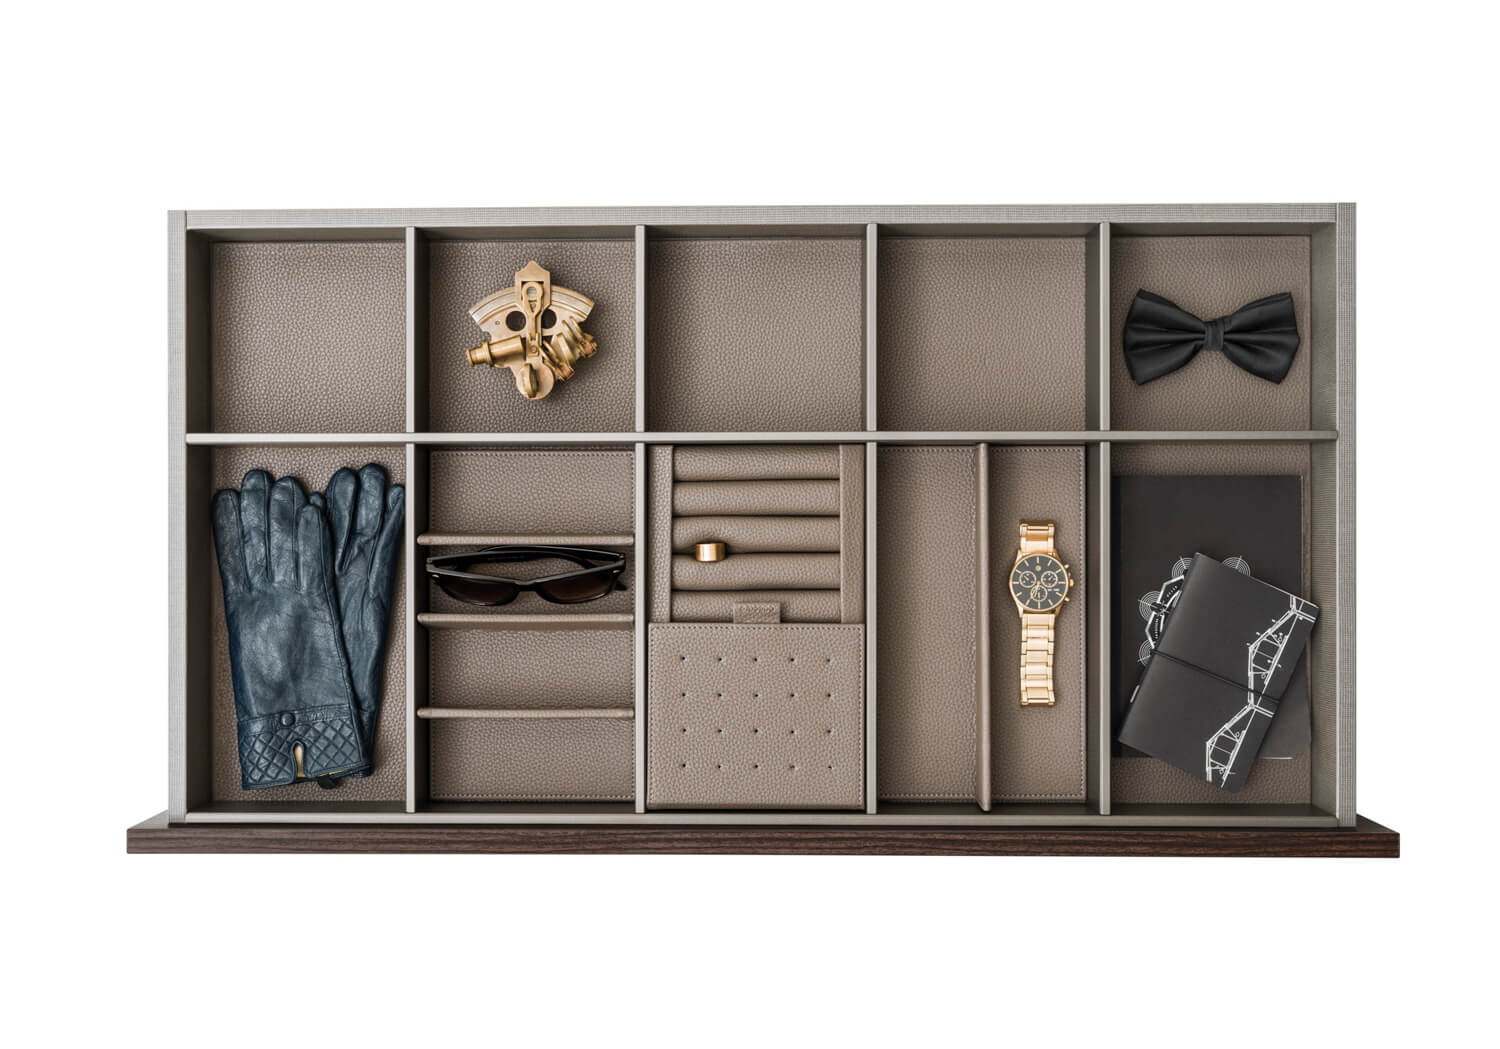 Drawer interior divided into compartments with easy leather inserts.